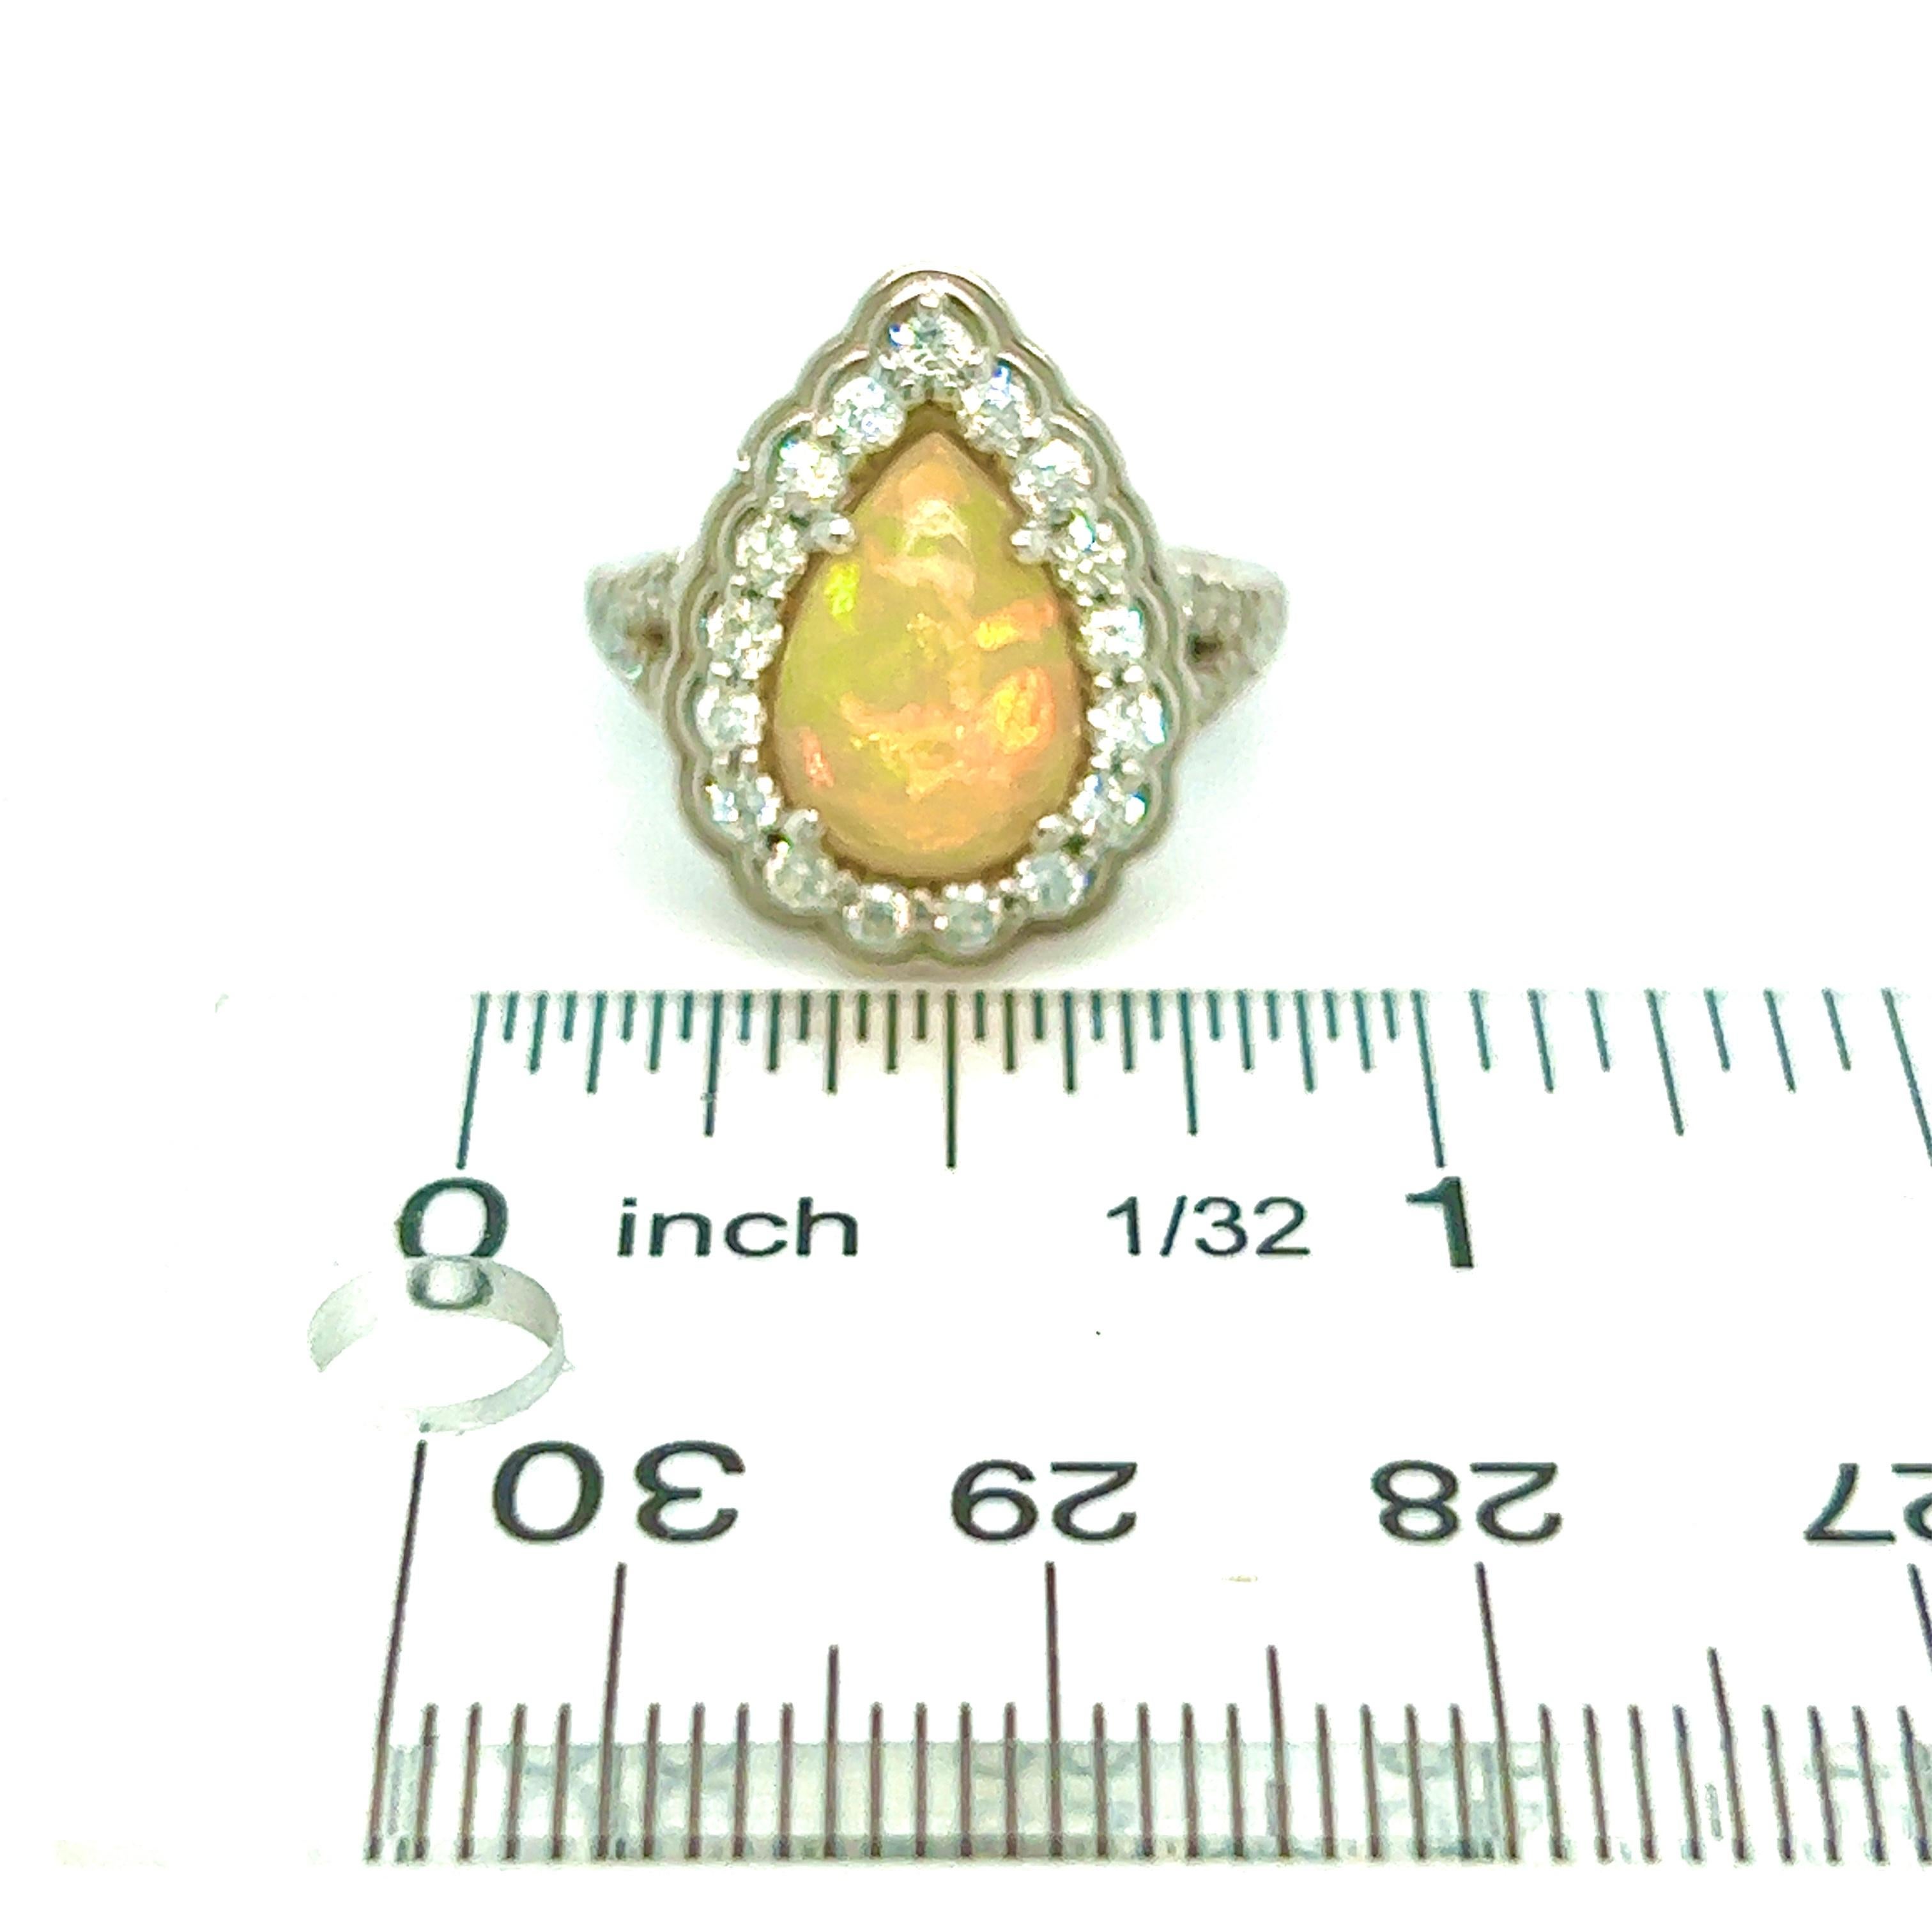 Pear Cut Natural Opal Diamond Ring 6.25 14k W Gold 2.35 TCW Certified For Sale